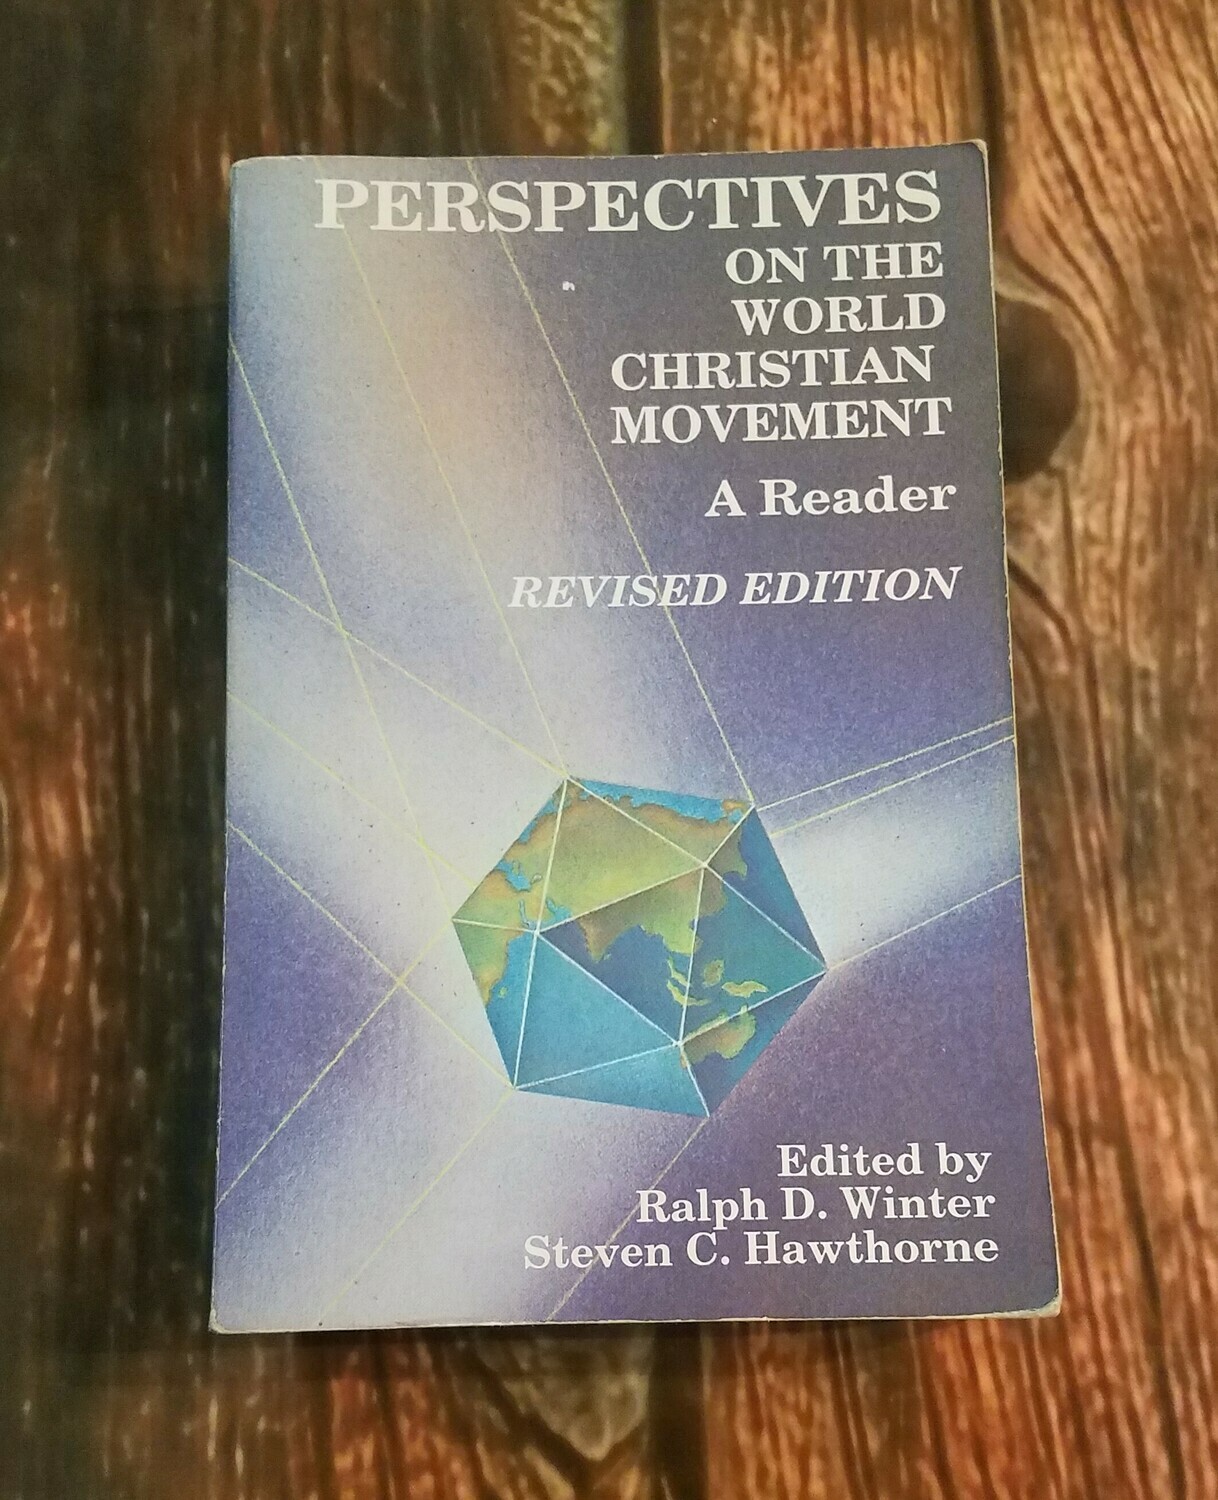 Perspectives on the World Christian Movement: Revised Edition by Ralph D. Winter and Steven C. Hawthorne